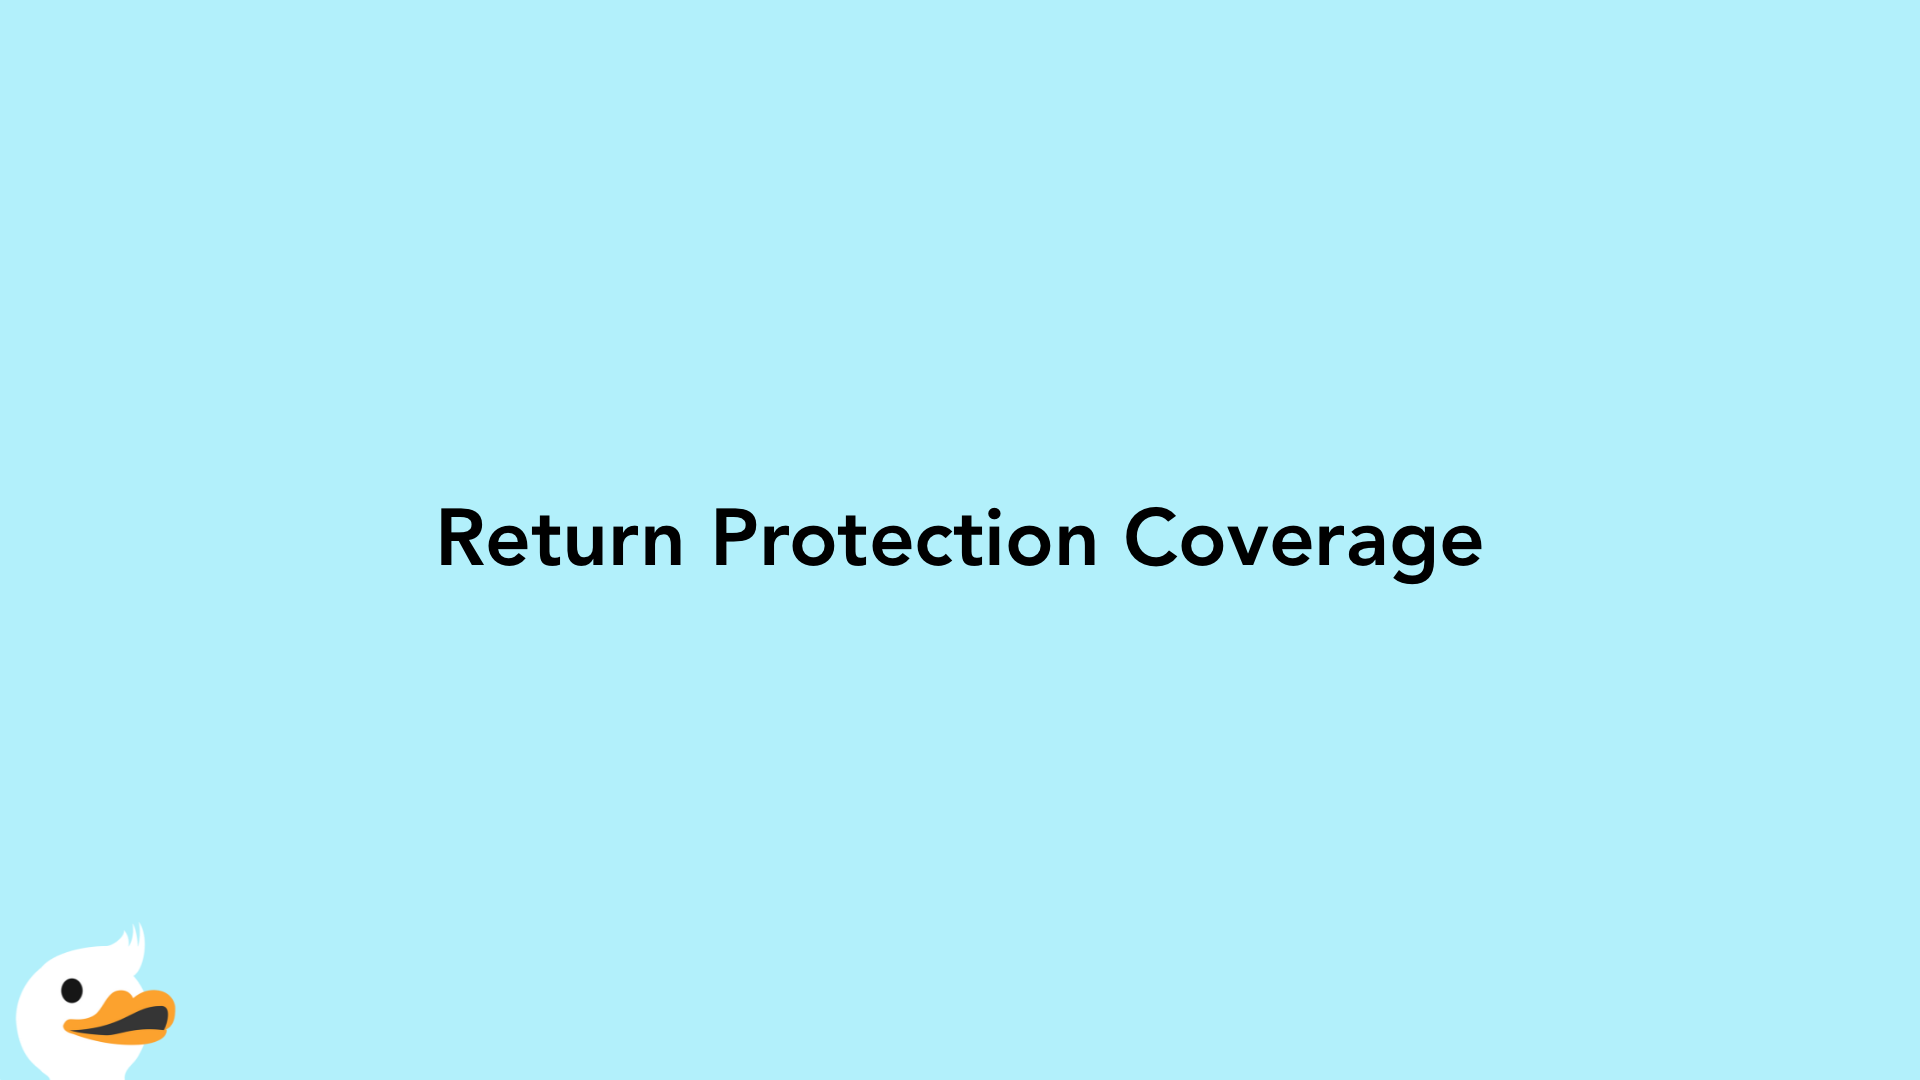 Return Protection Coverage